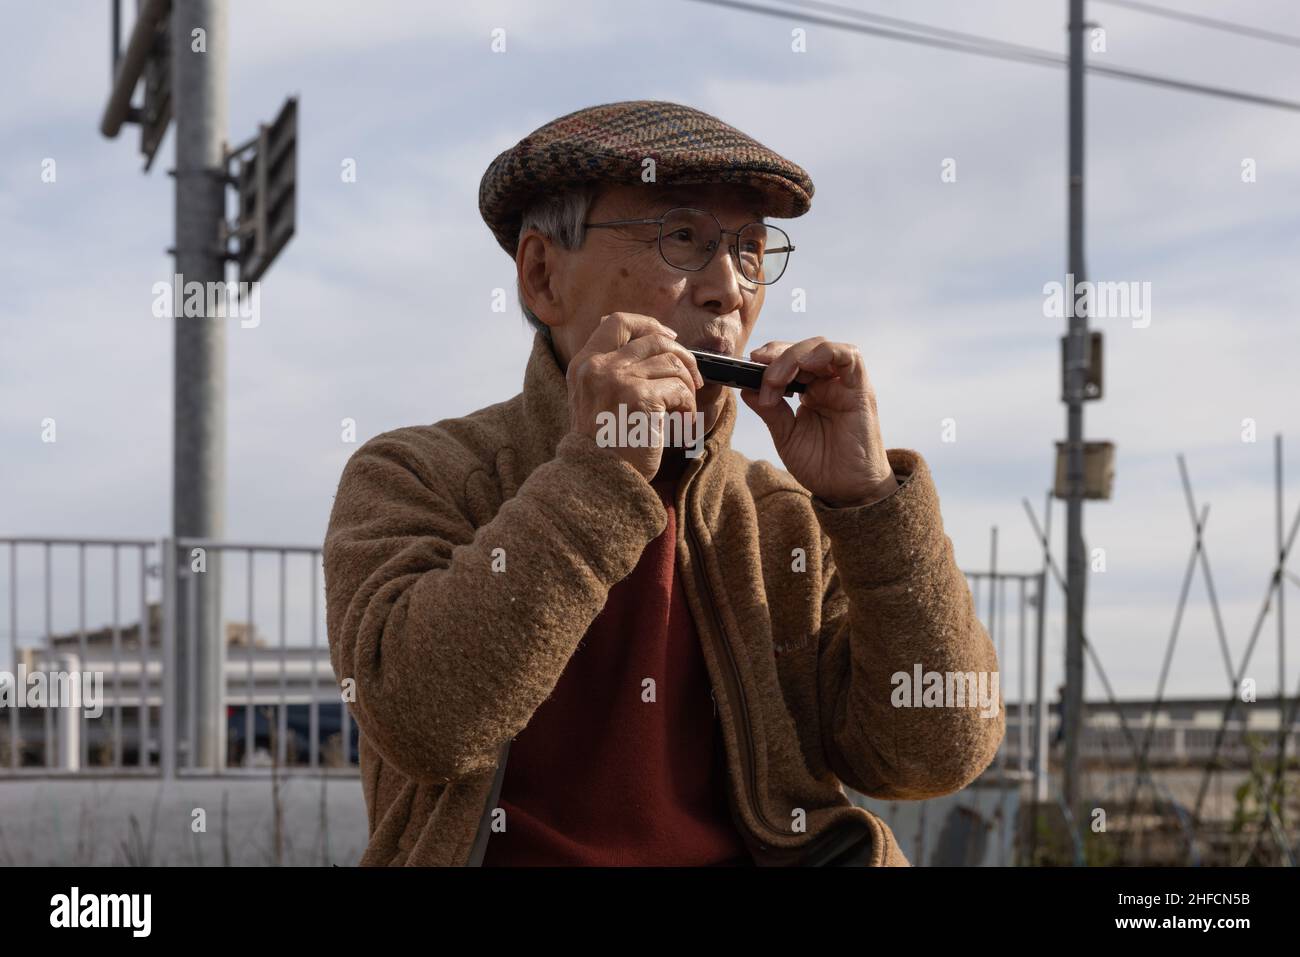 Senior citizen plays a harmonica during Dondo-Yaki in  is  a traditional event usually held in mid-January and is considered the end  of New Year celebrations in Japan. During this event Shimekazari (